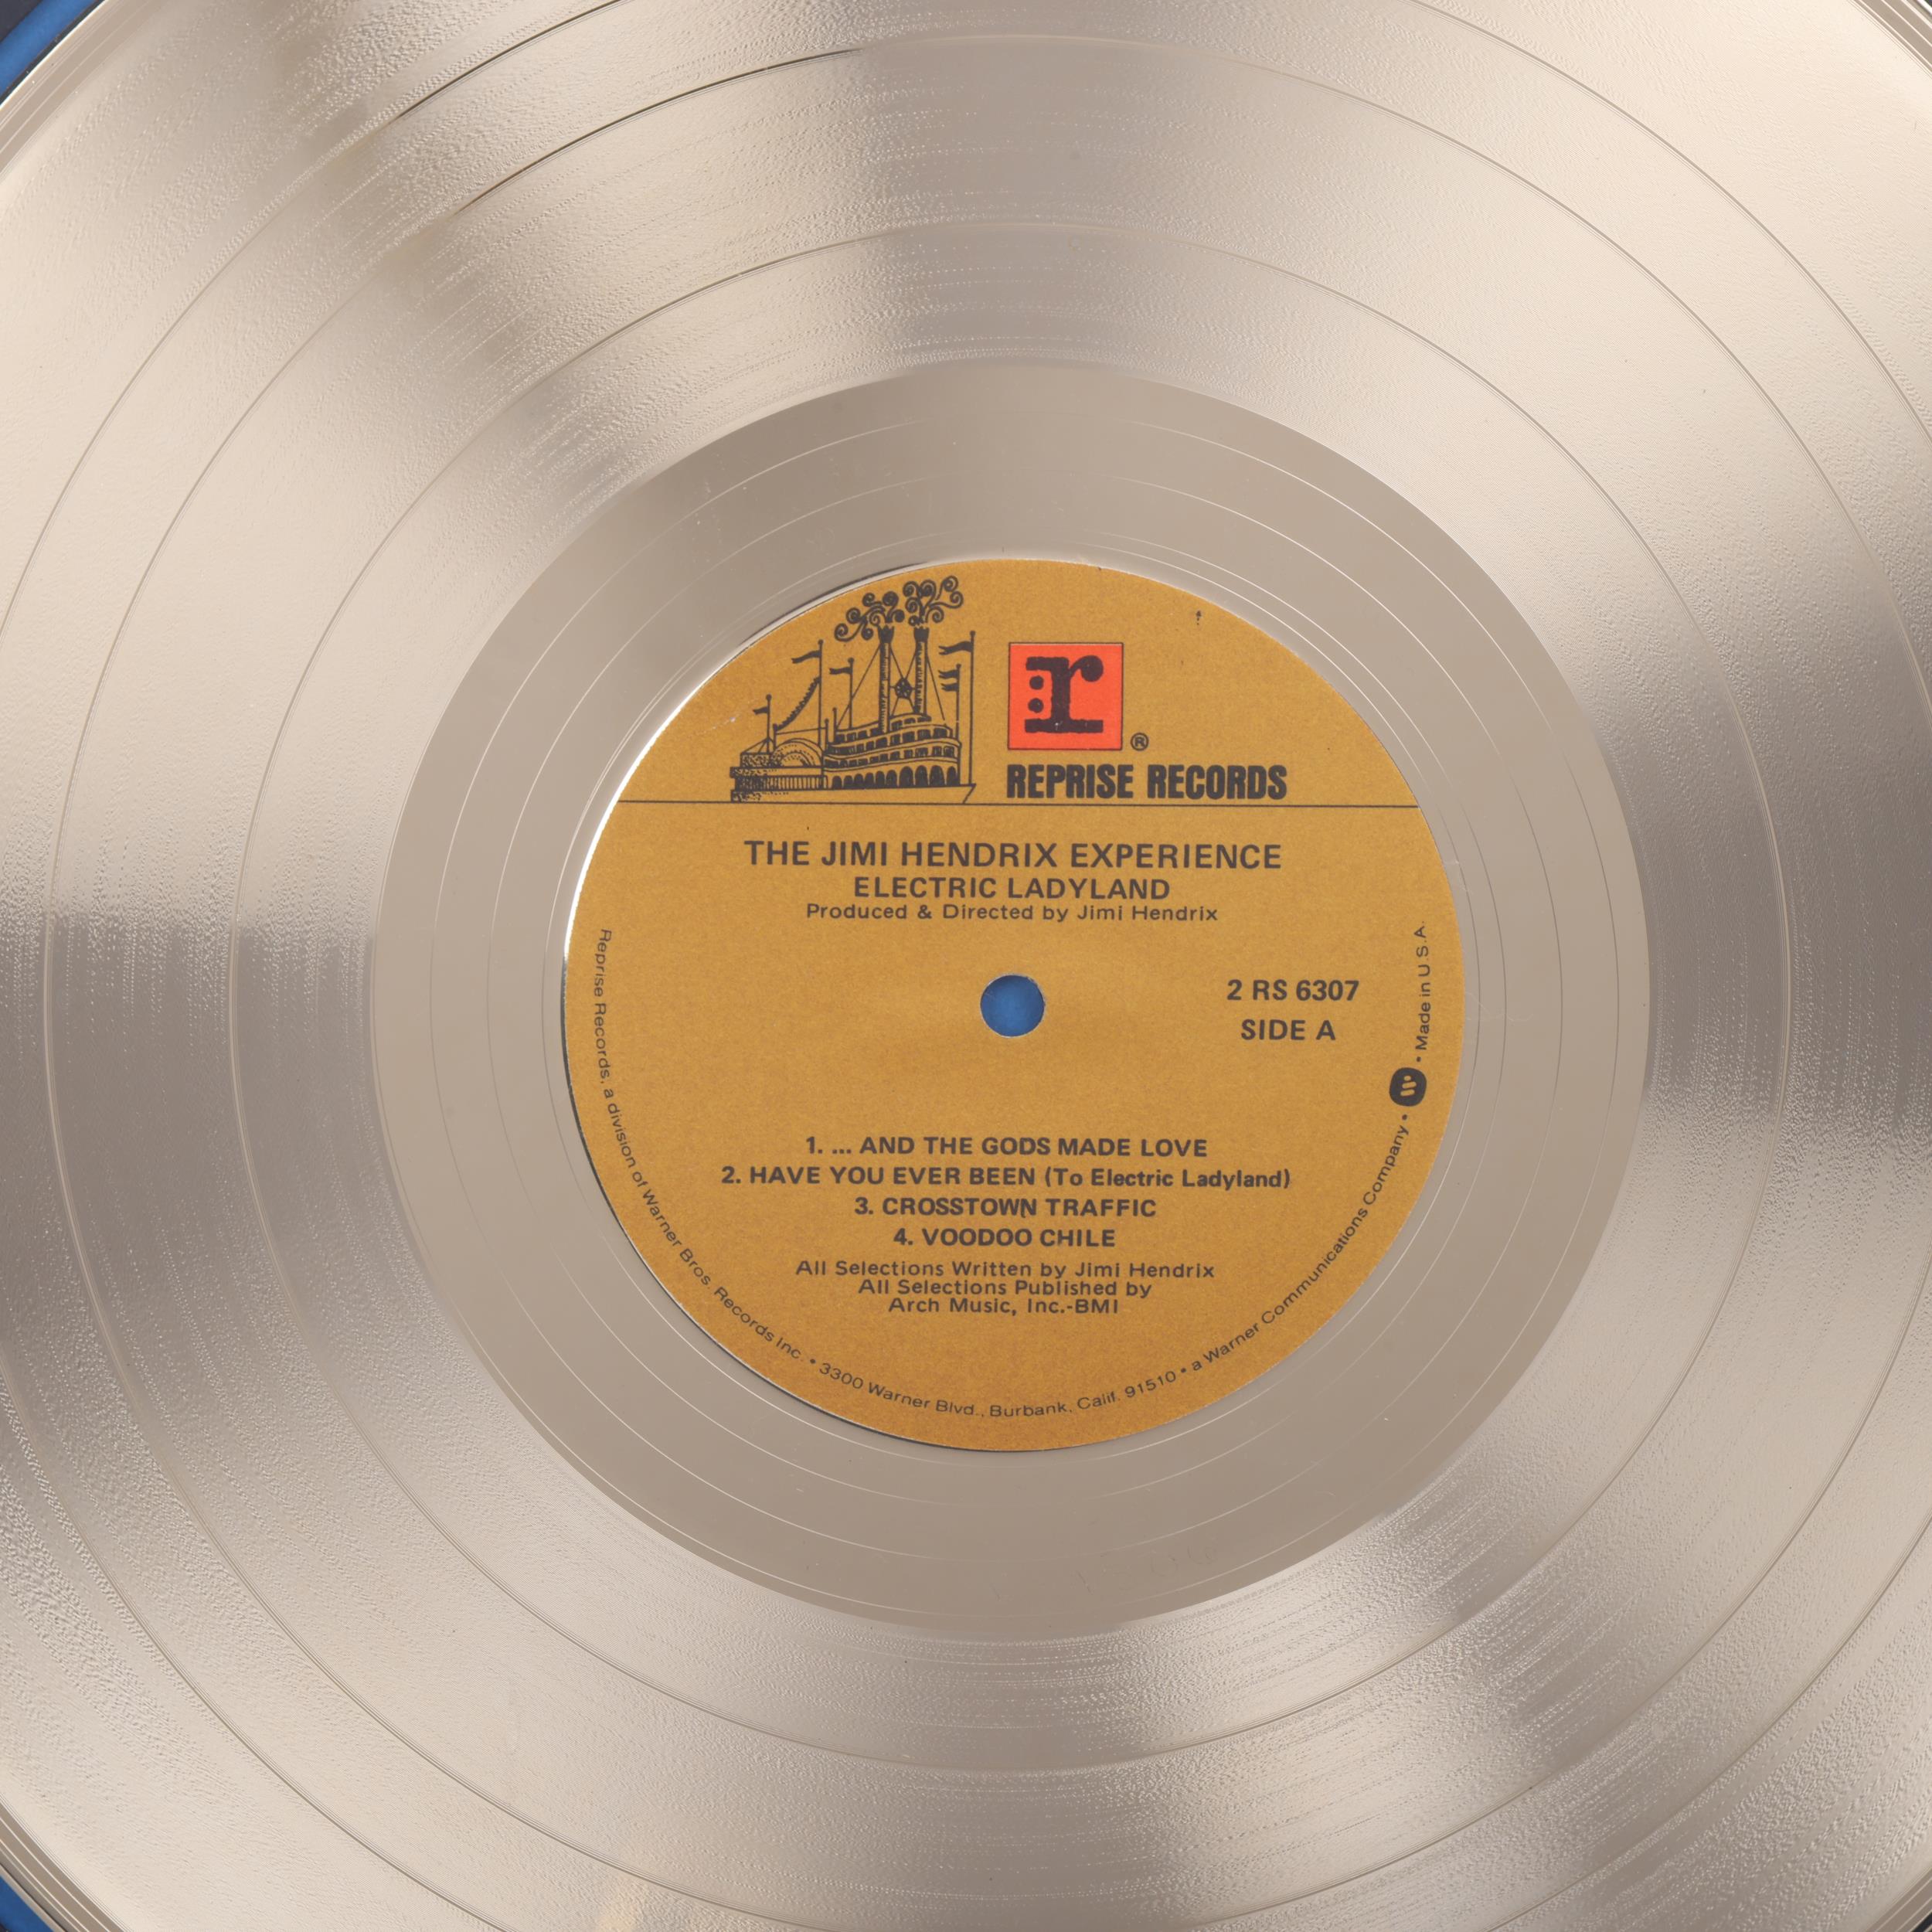 JIMI HENDRIX EXPERIENCE a GOLD DISC presented to MITCH MITCHELL to Commemorate The Sale of More Than - Image 3 of 3